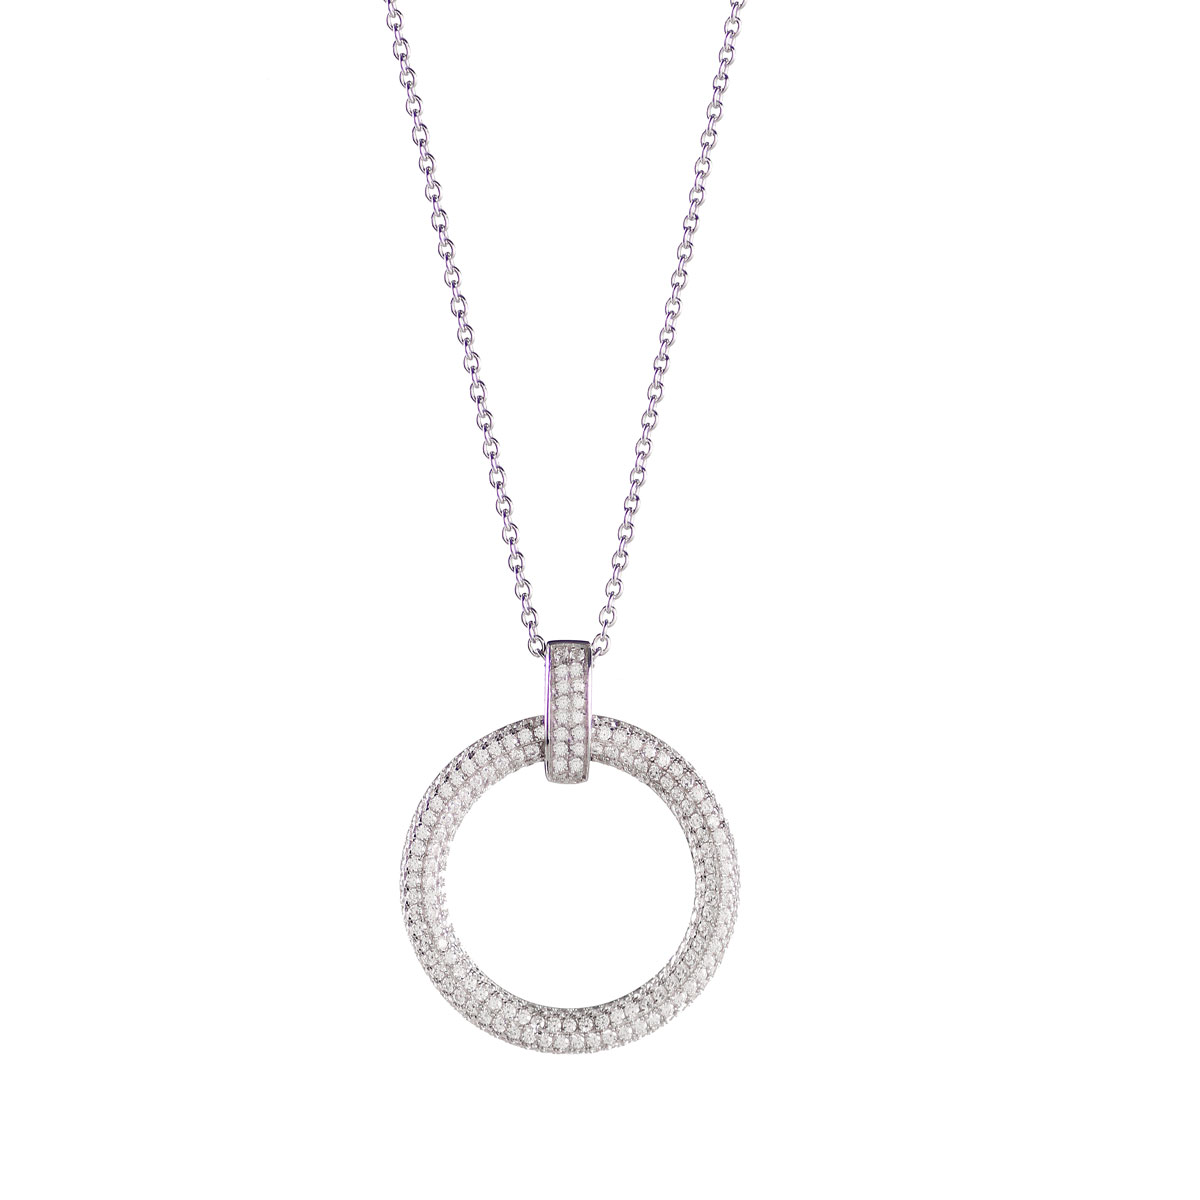 Cashs Ireland Clarice Sterling Silver Pave Pendant Necklace